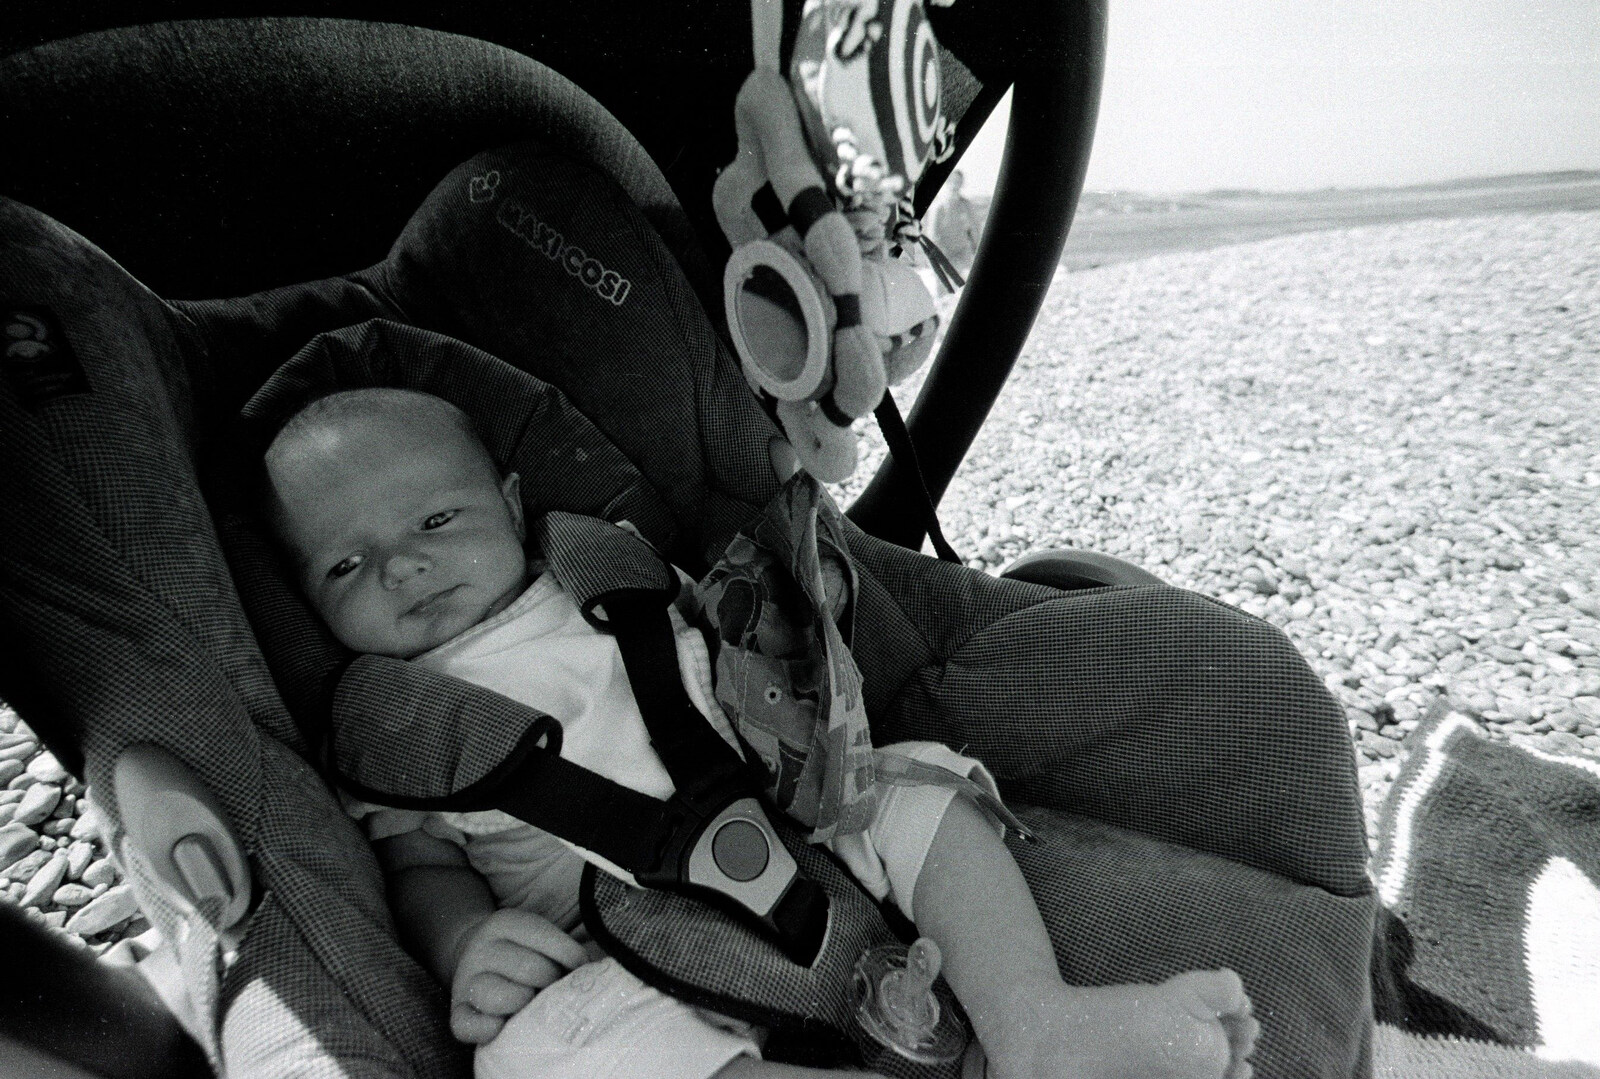 Harry in his car seat from The BSCC at Needham, and a Birthday By The Sea, Cley, Norfolk - 26th May 2012